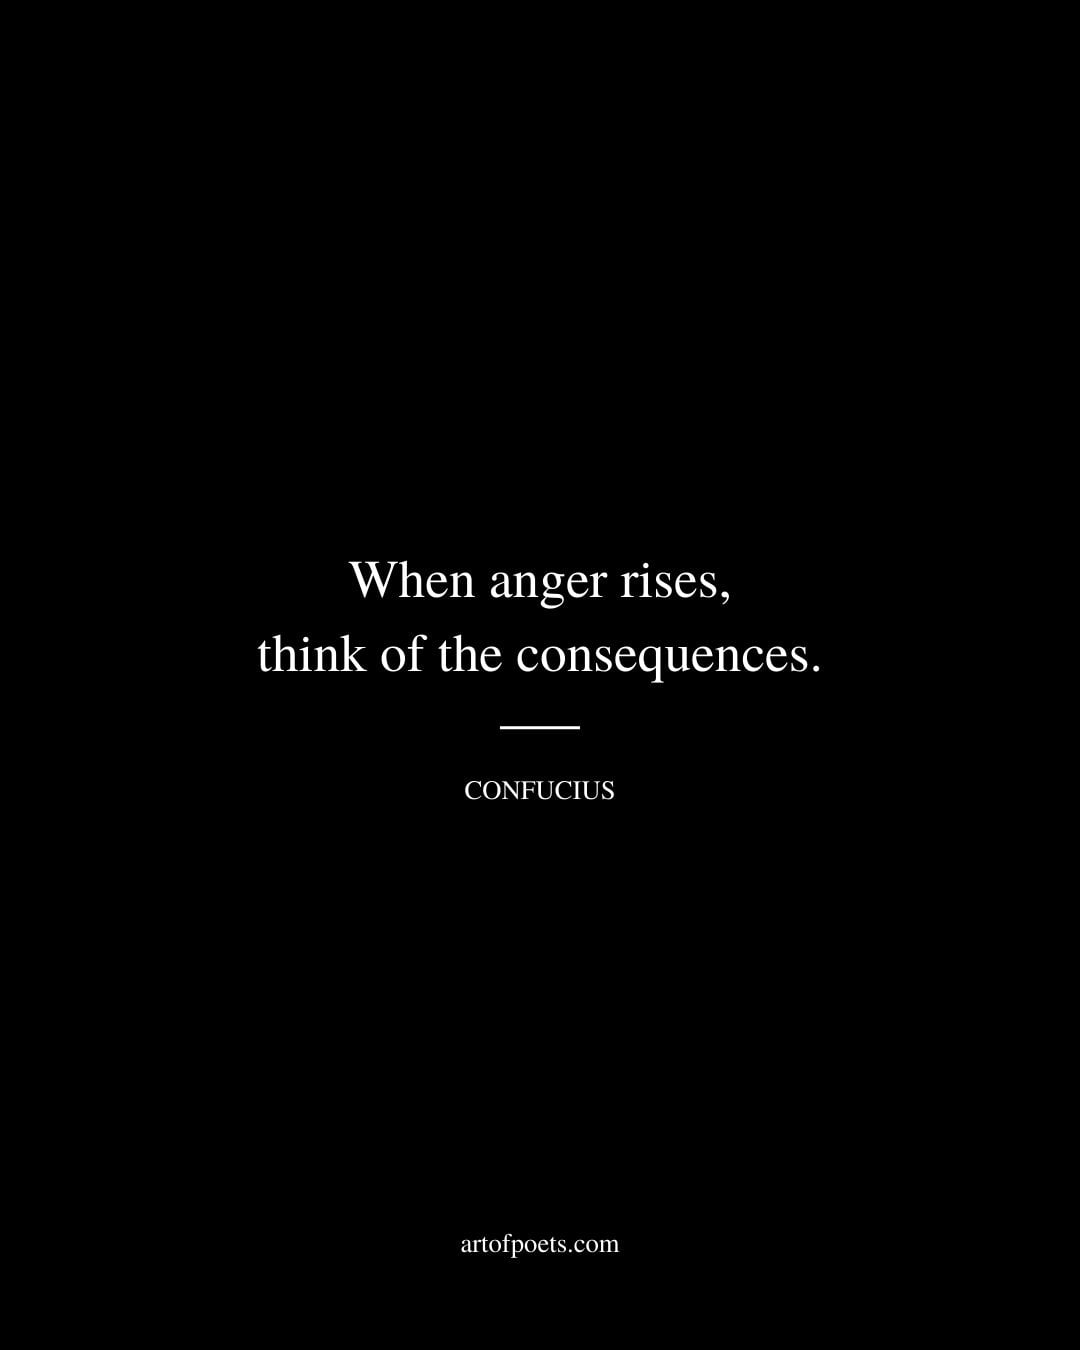 When anger rises think of the consequences 1